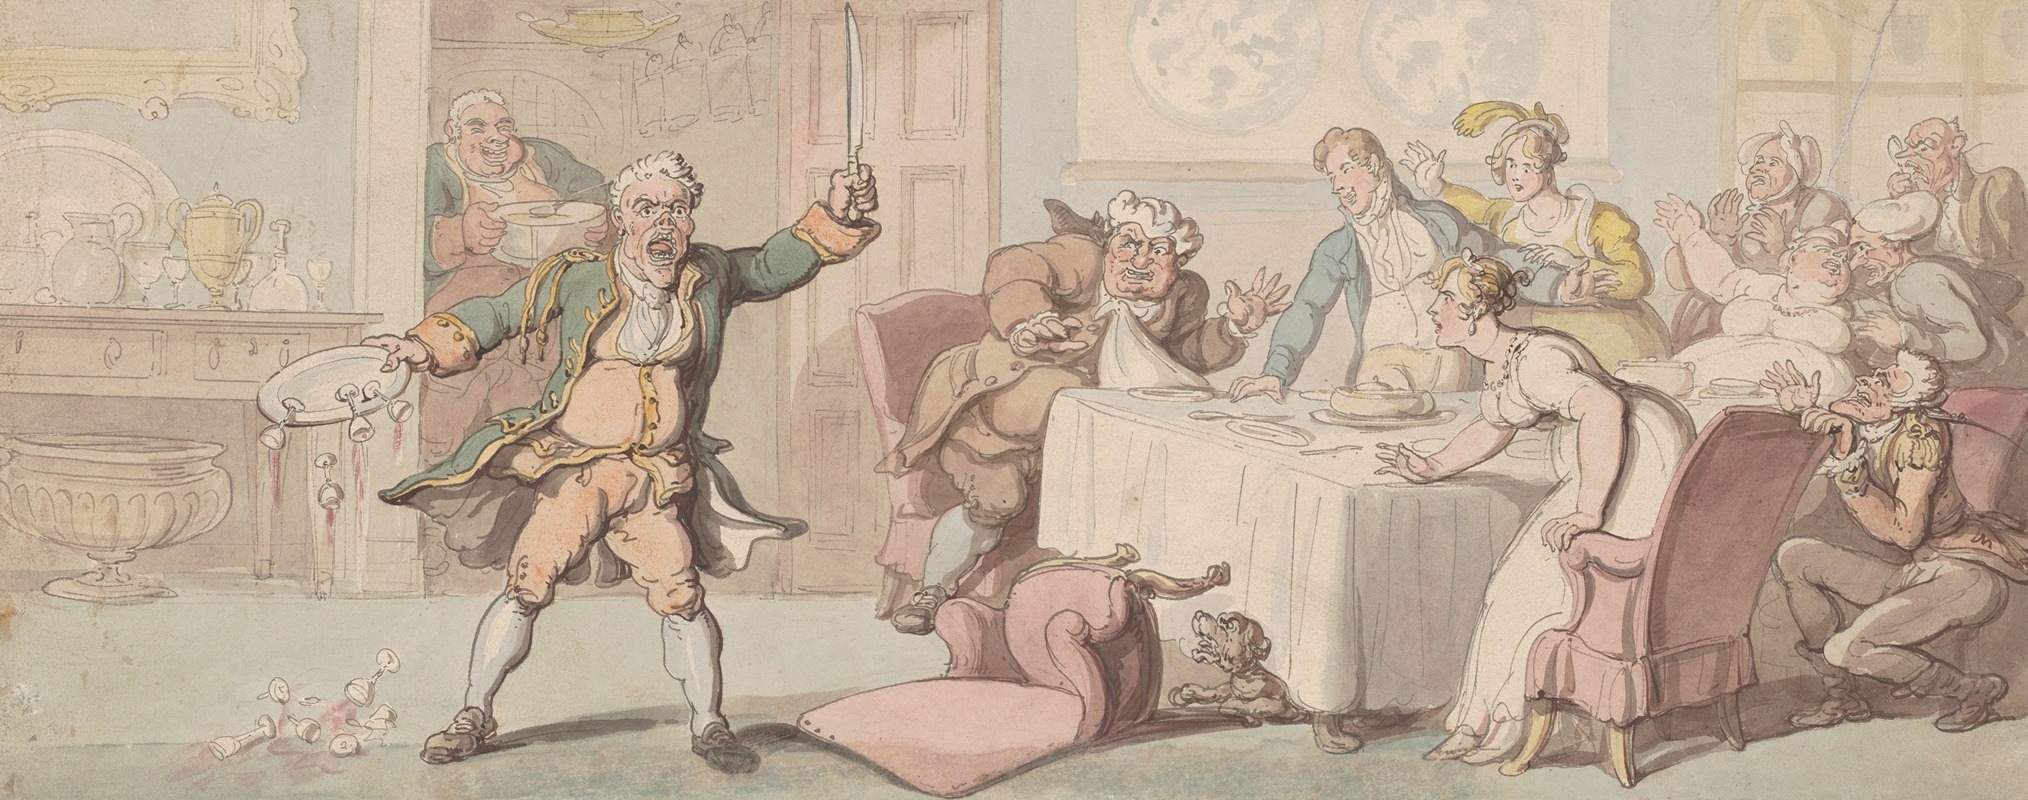 Thomas Rowlandson - Stage struck ; Or digging in all the world’s a stage